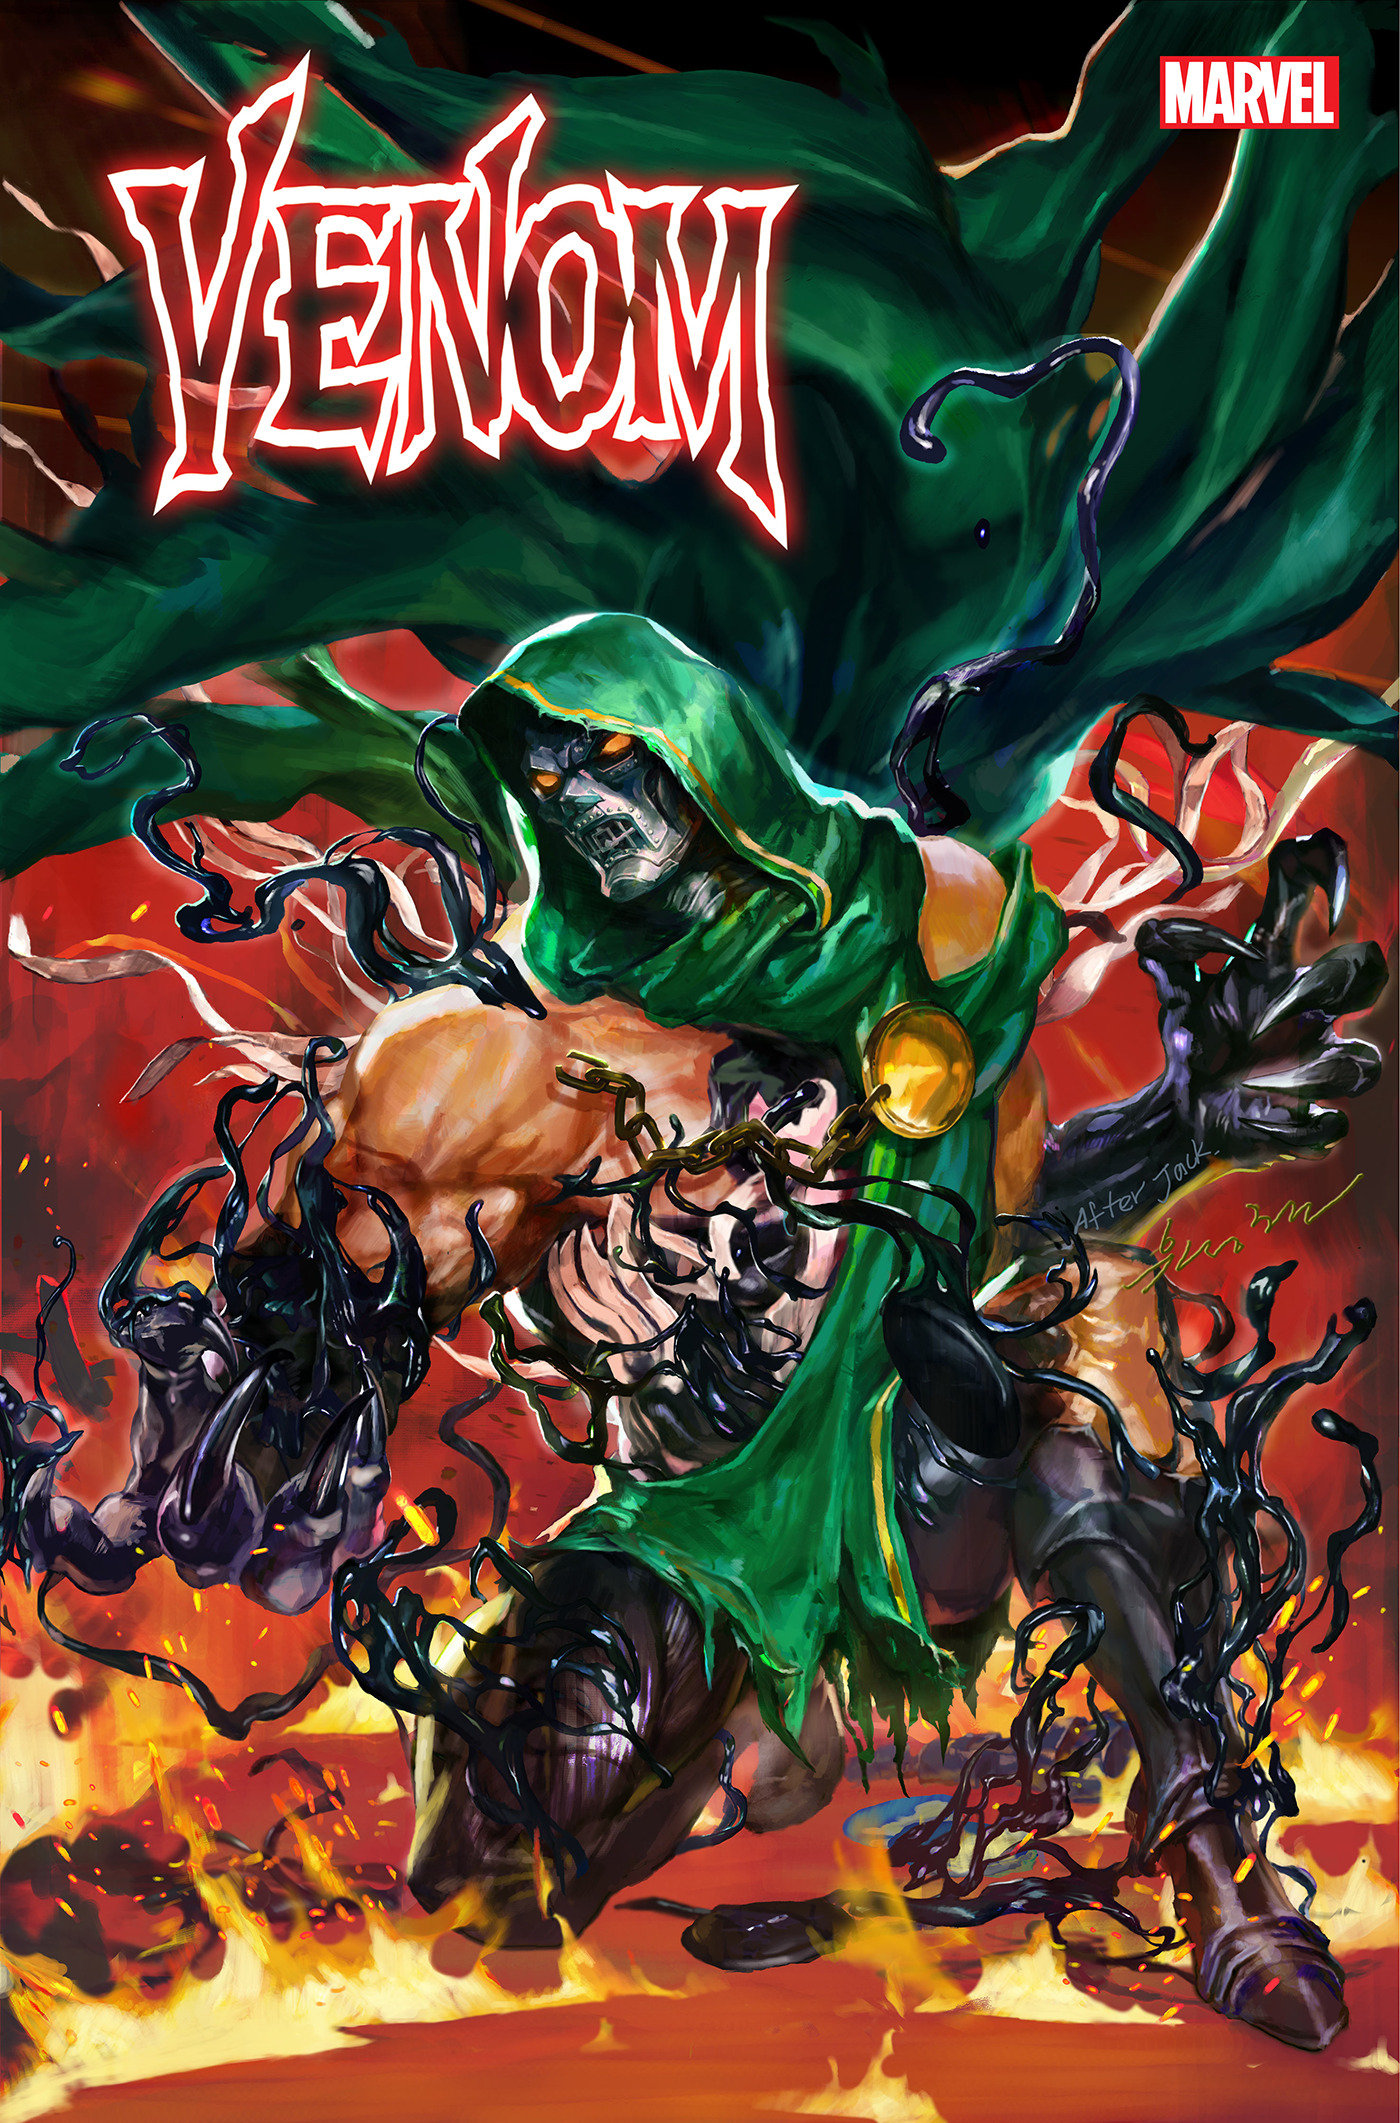 Venom #24 1 for 25 Incentive Sunghan Yune Variant [Gods]